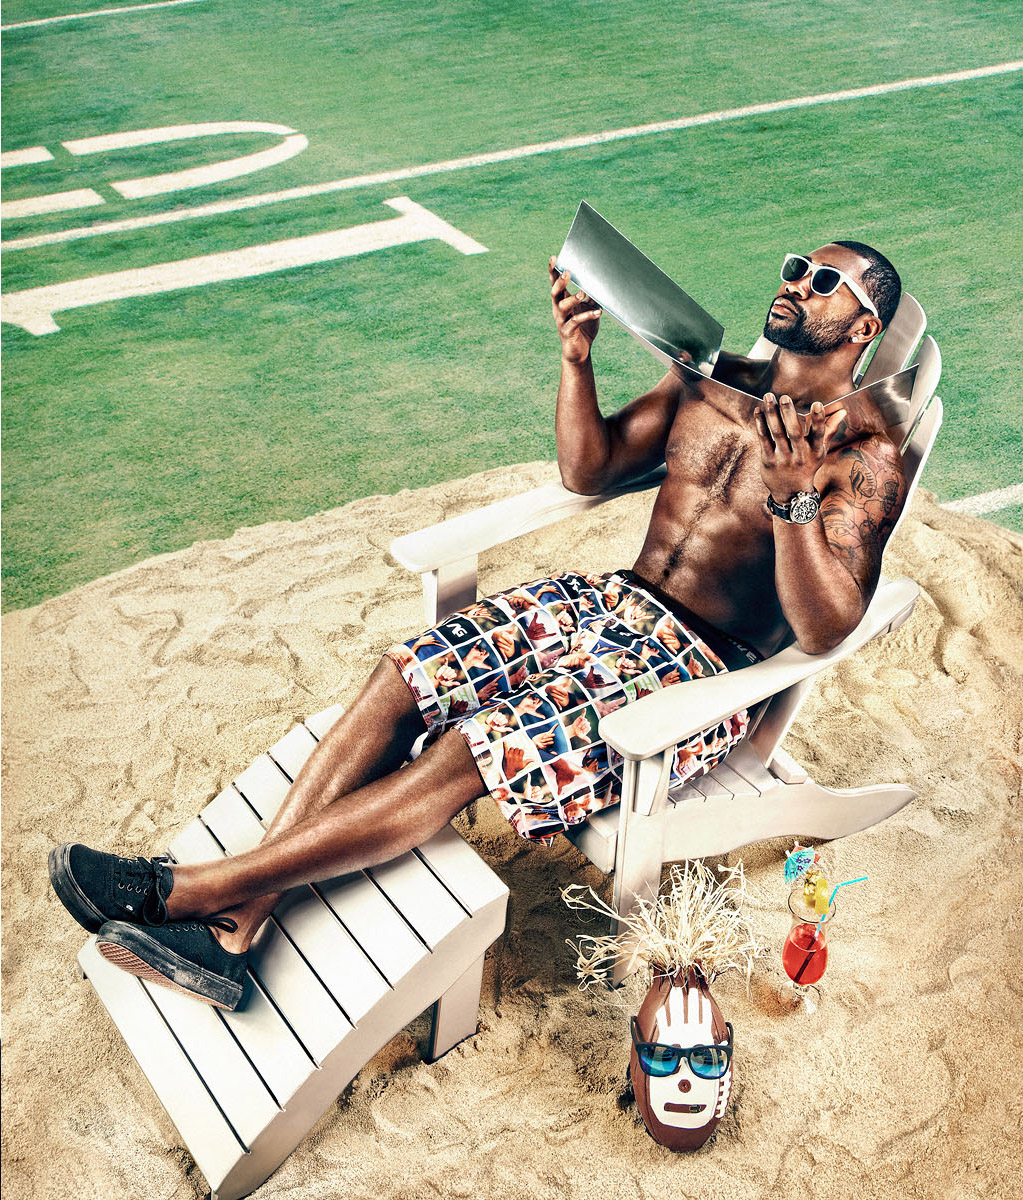 Darrelle Revis photographed by Editorial Photographer Blair Bunting